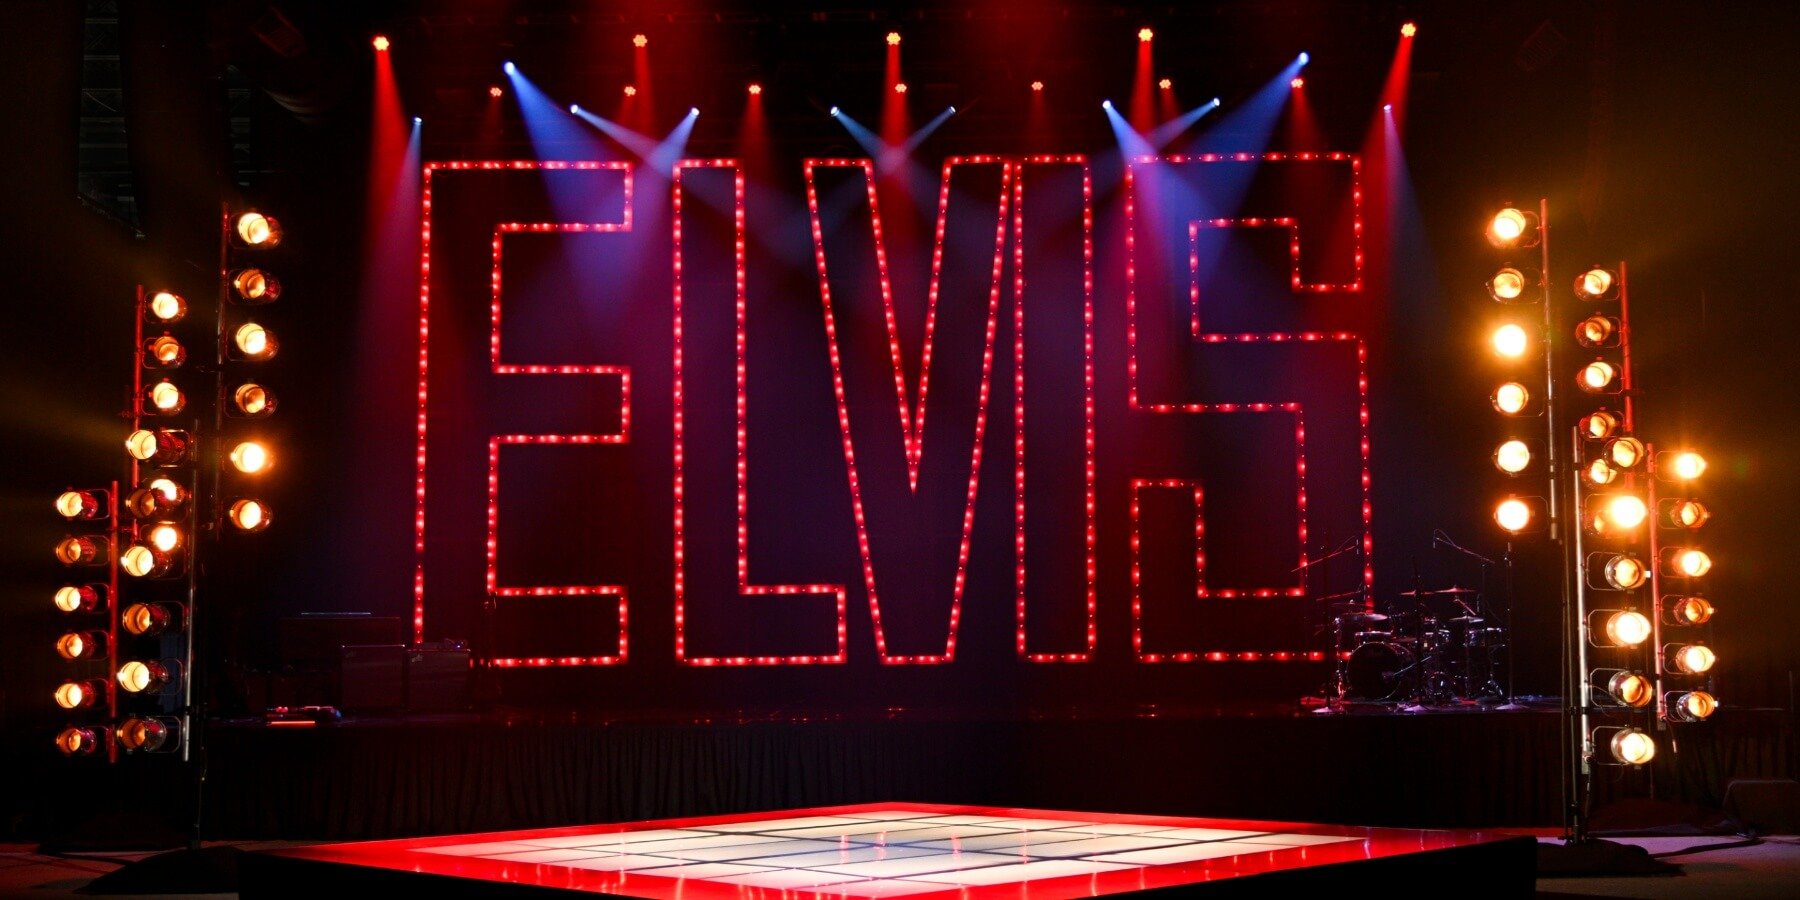 Graceland was the scene for a night of Christmas music dedicated to Elvis Presley's memory in 2023.